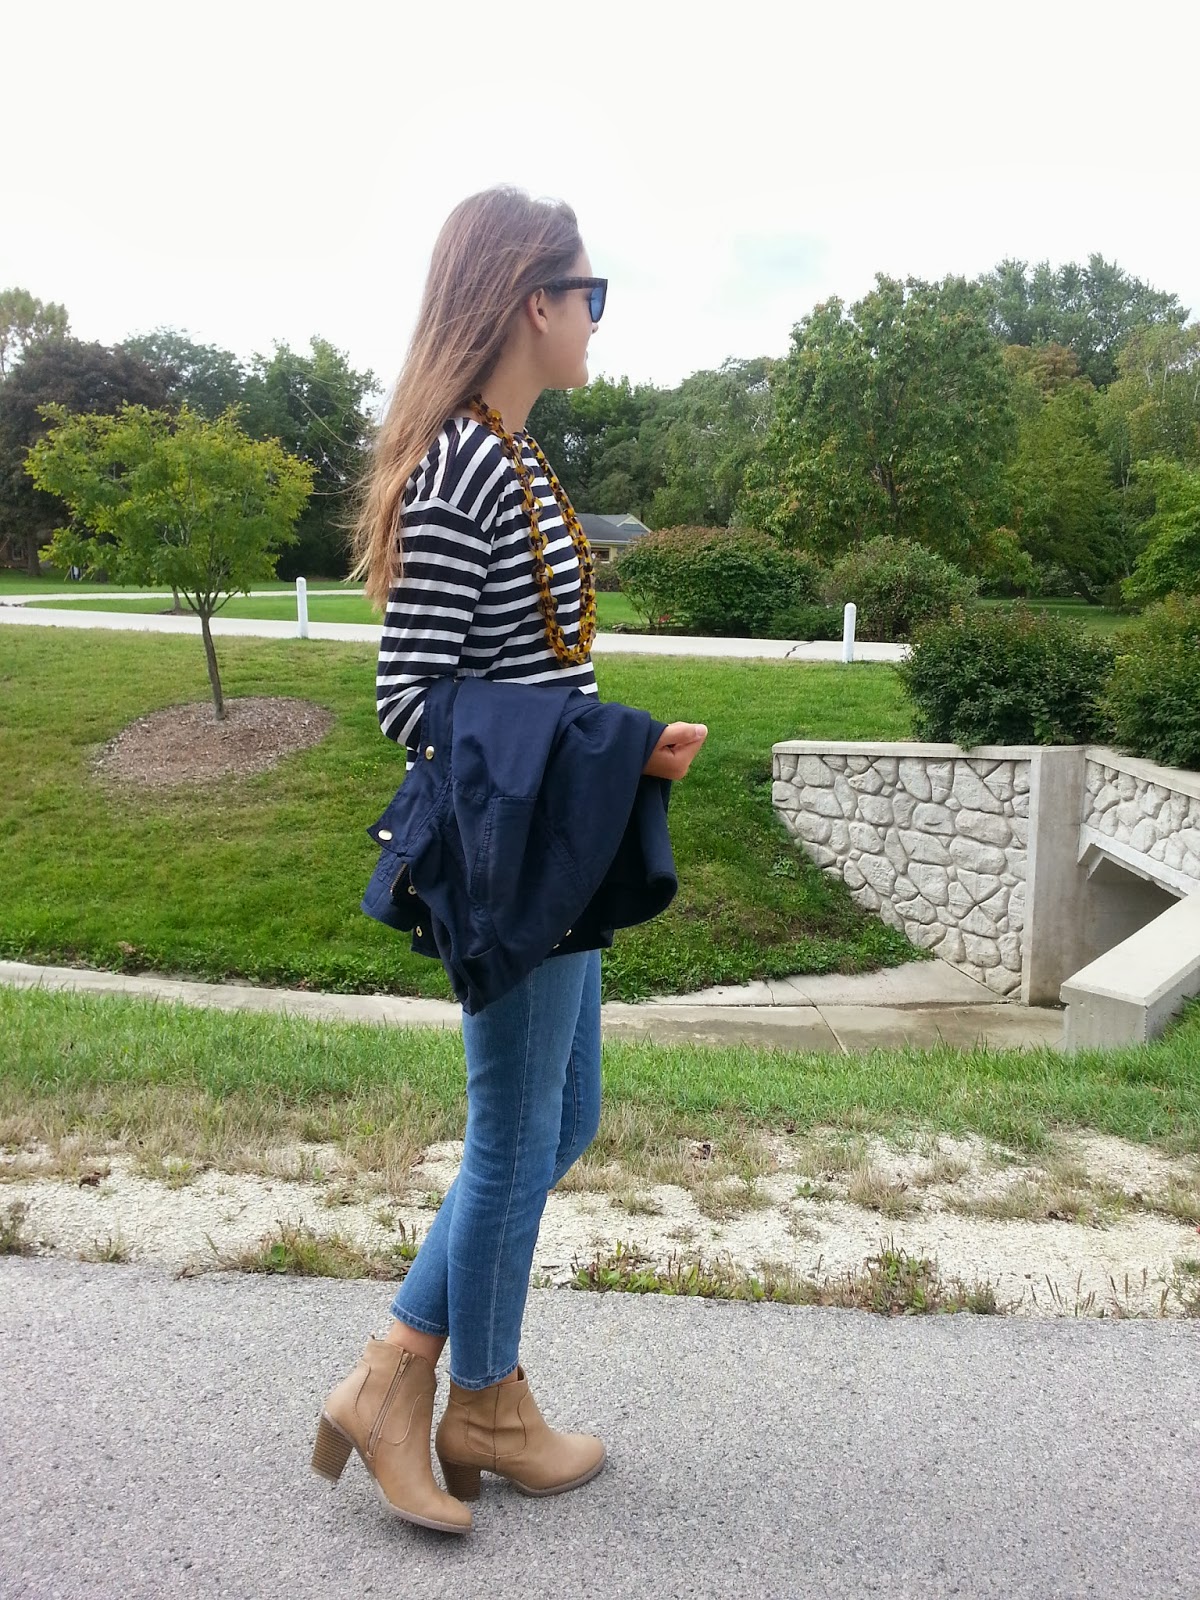 citrus and style: Outfit :: Stripes and Tortoiseshell